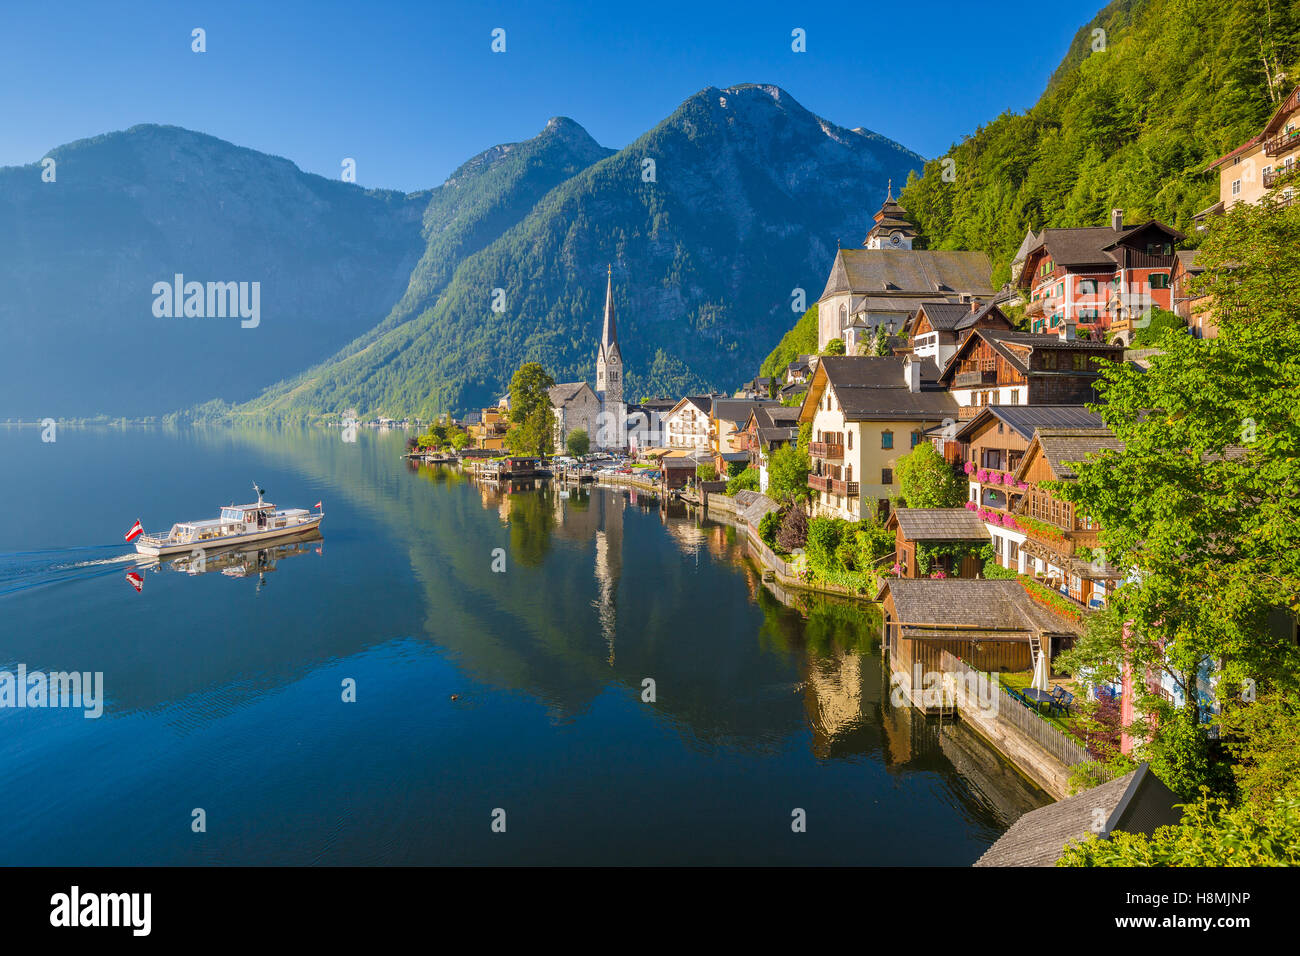 Classic postcard view of famous Hallstatt lakeside town in the Alps with ship in beautiful morning light, Salzkammergut, Austria Stock Photo